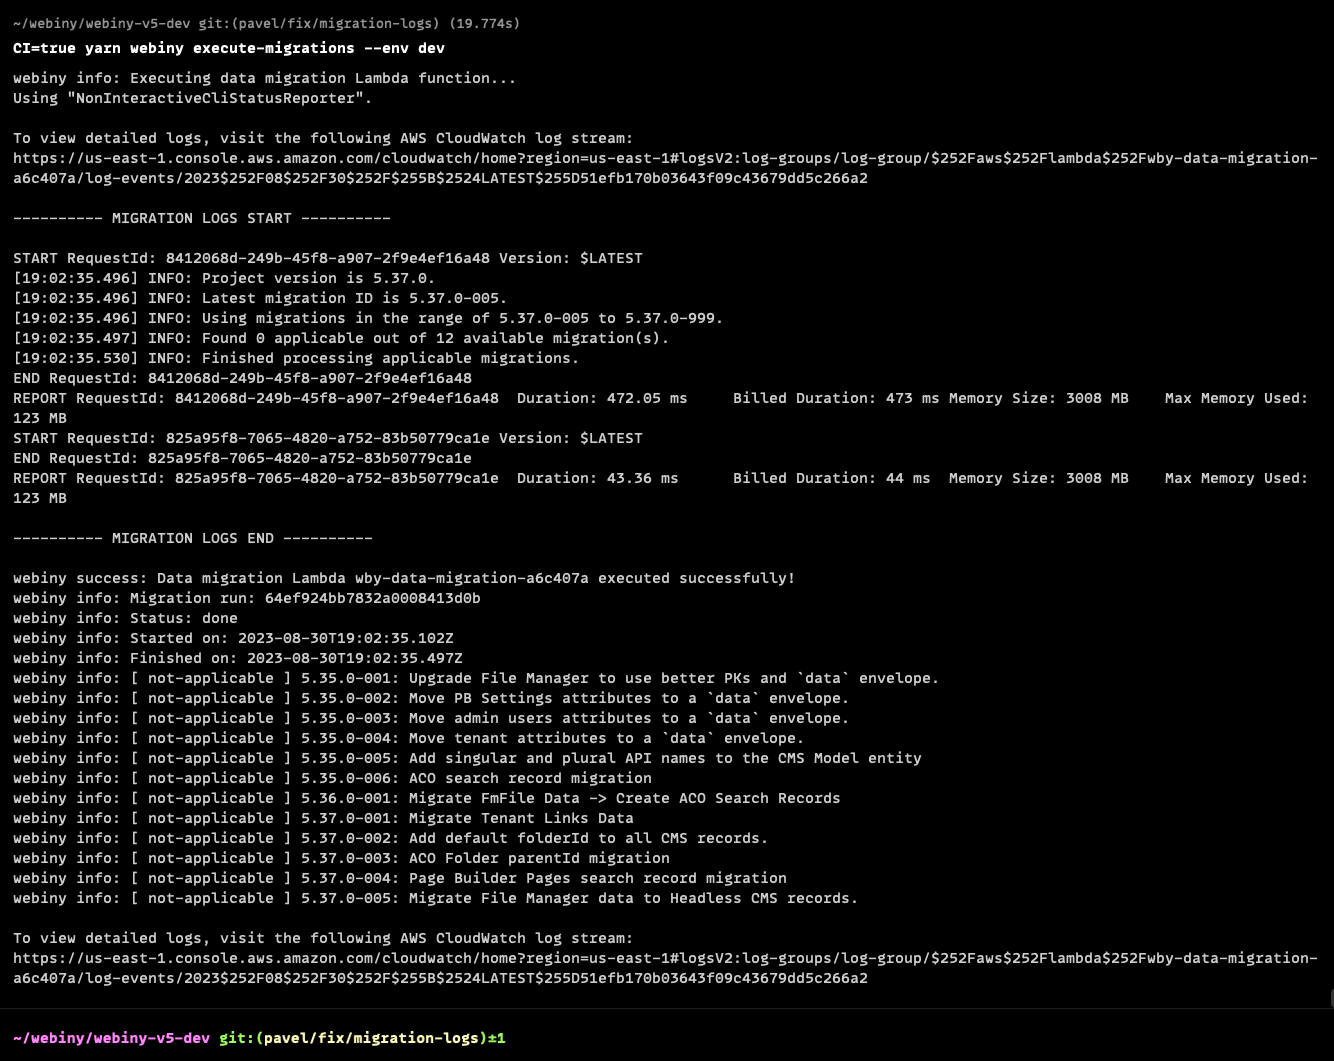 Migration Logs Printed to the CLI